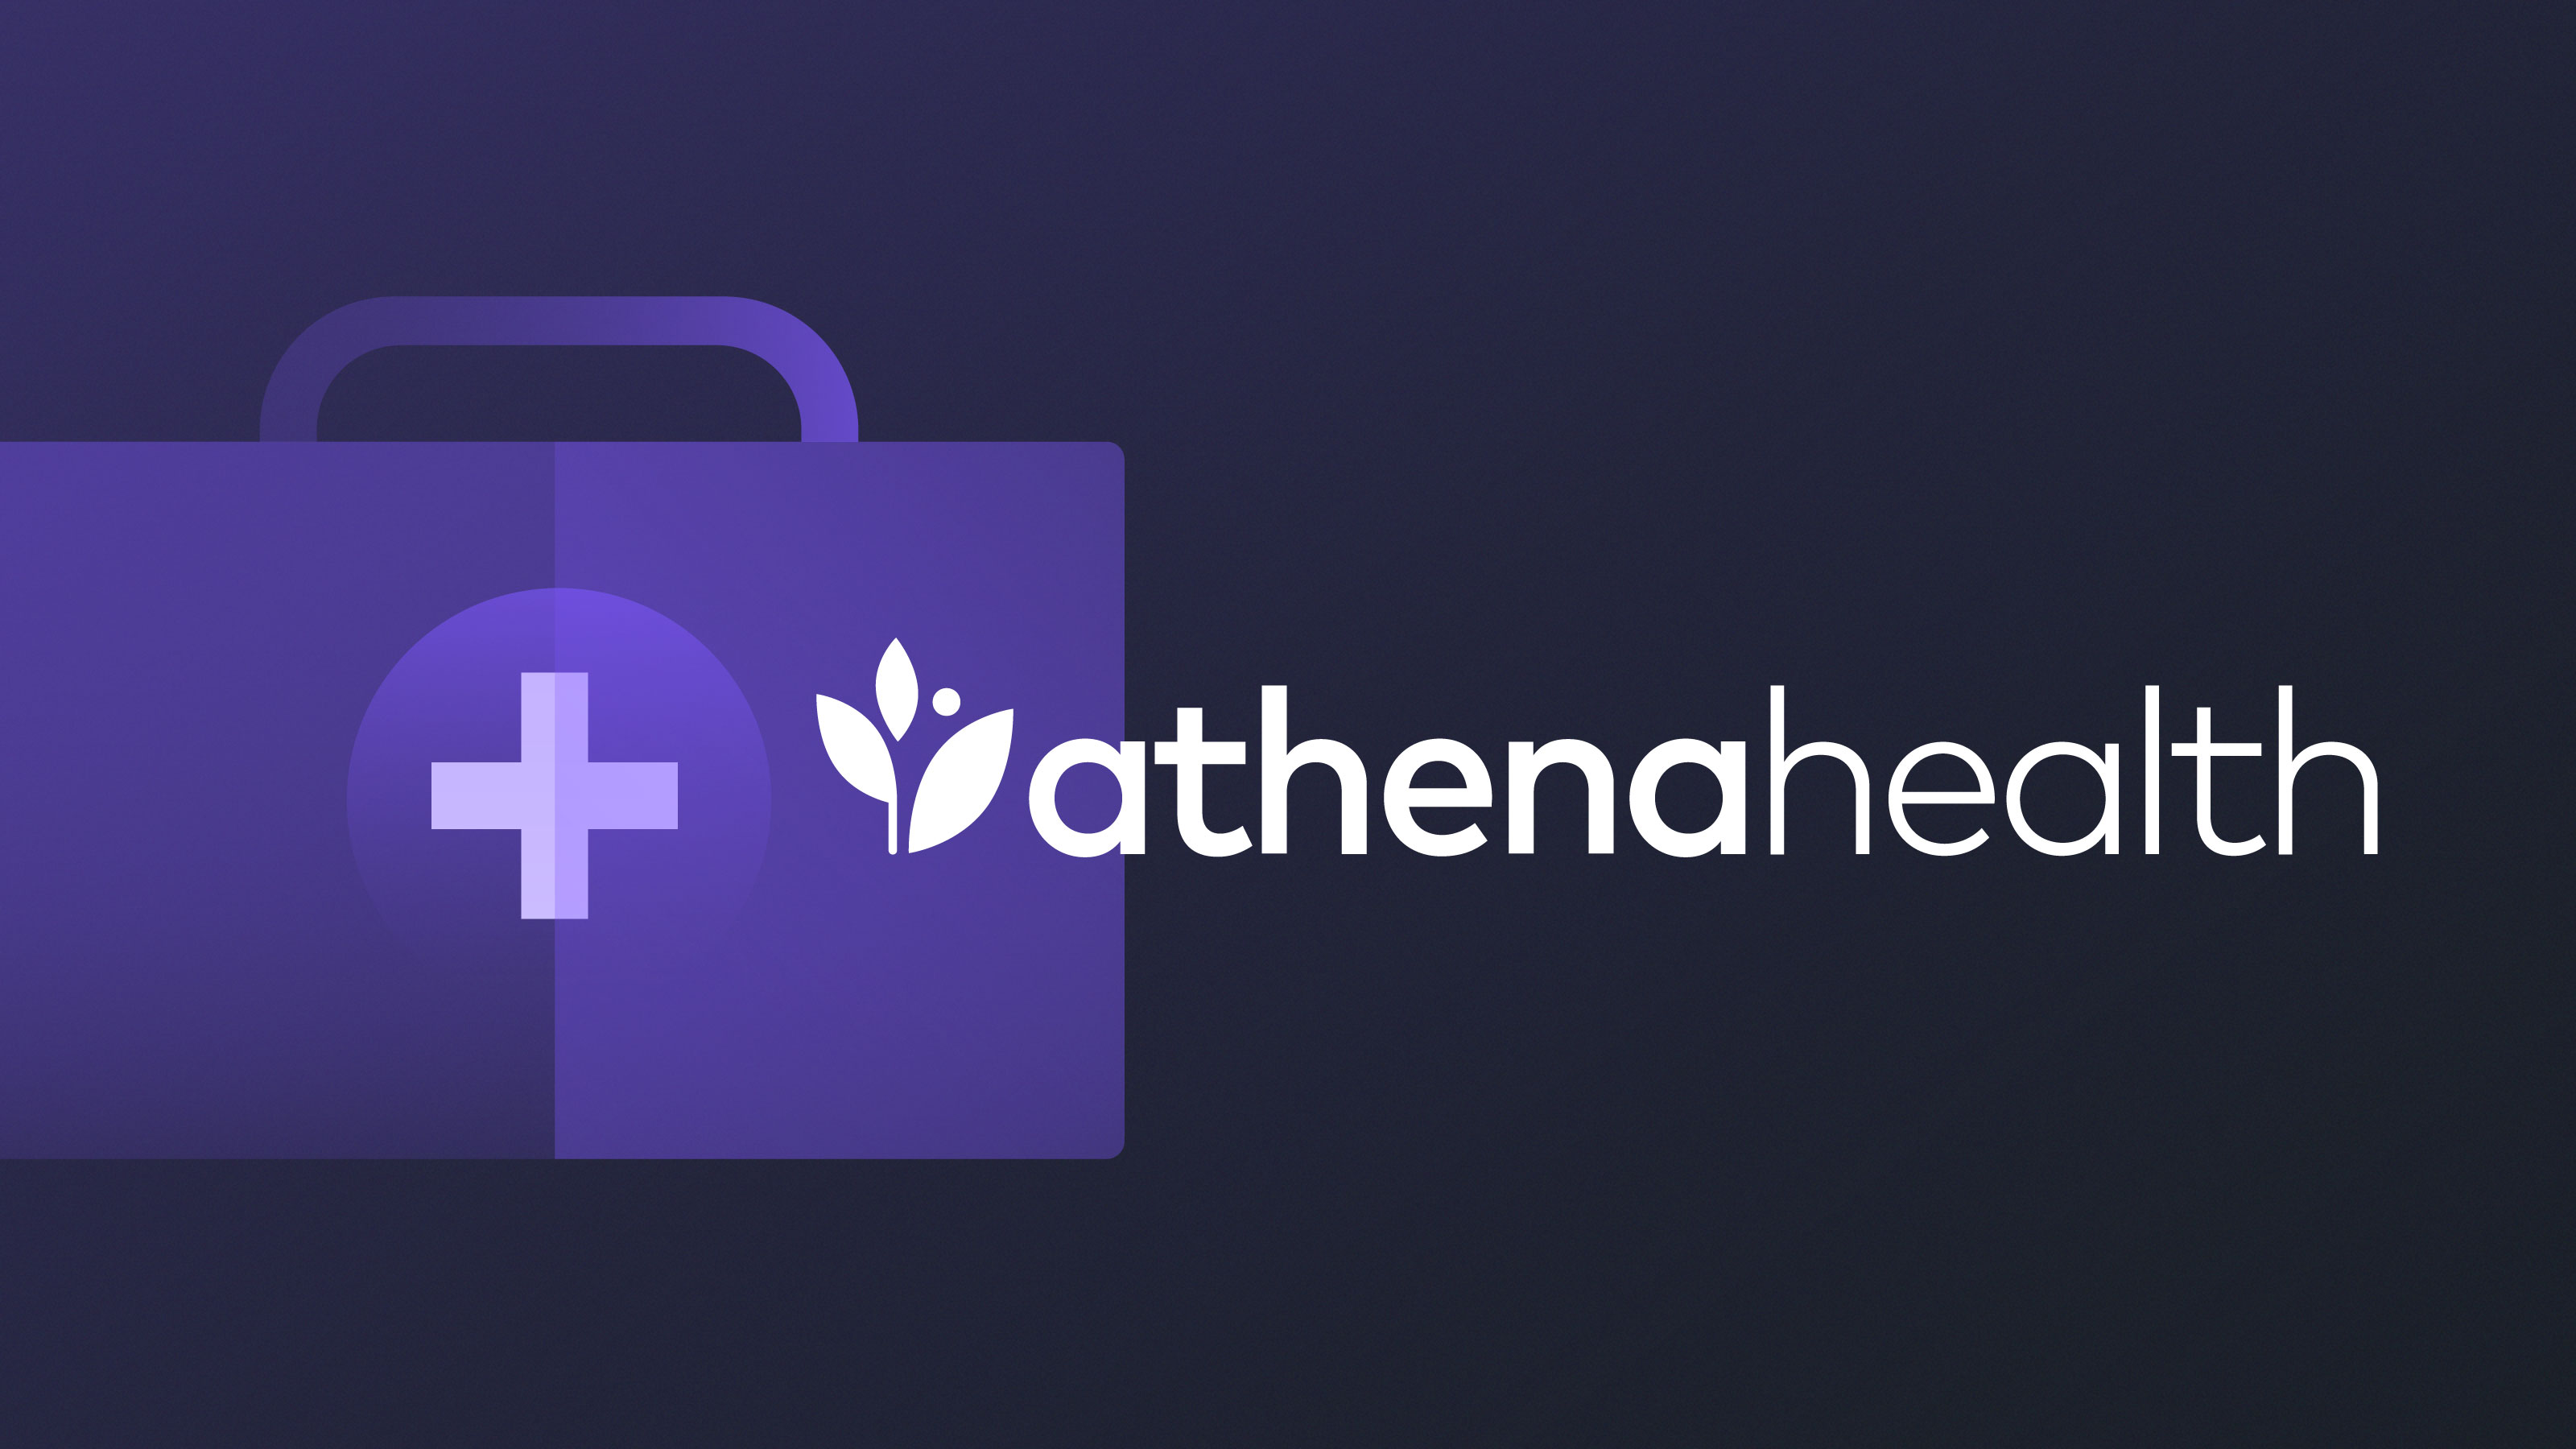 DC/OS helps athenahealth build cloud-based services | D2iQ